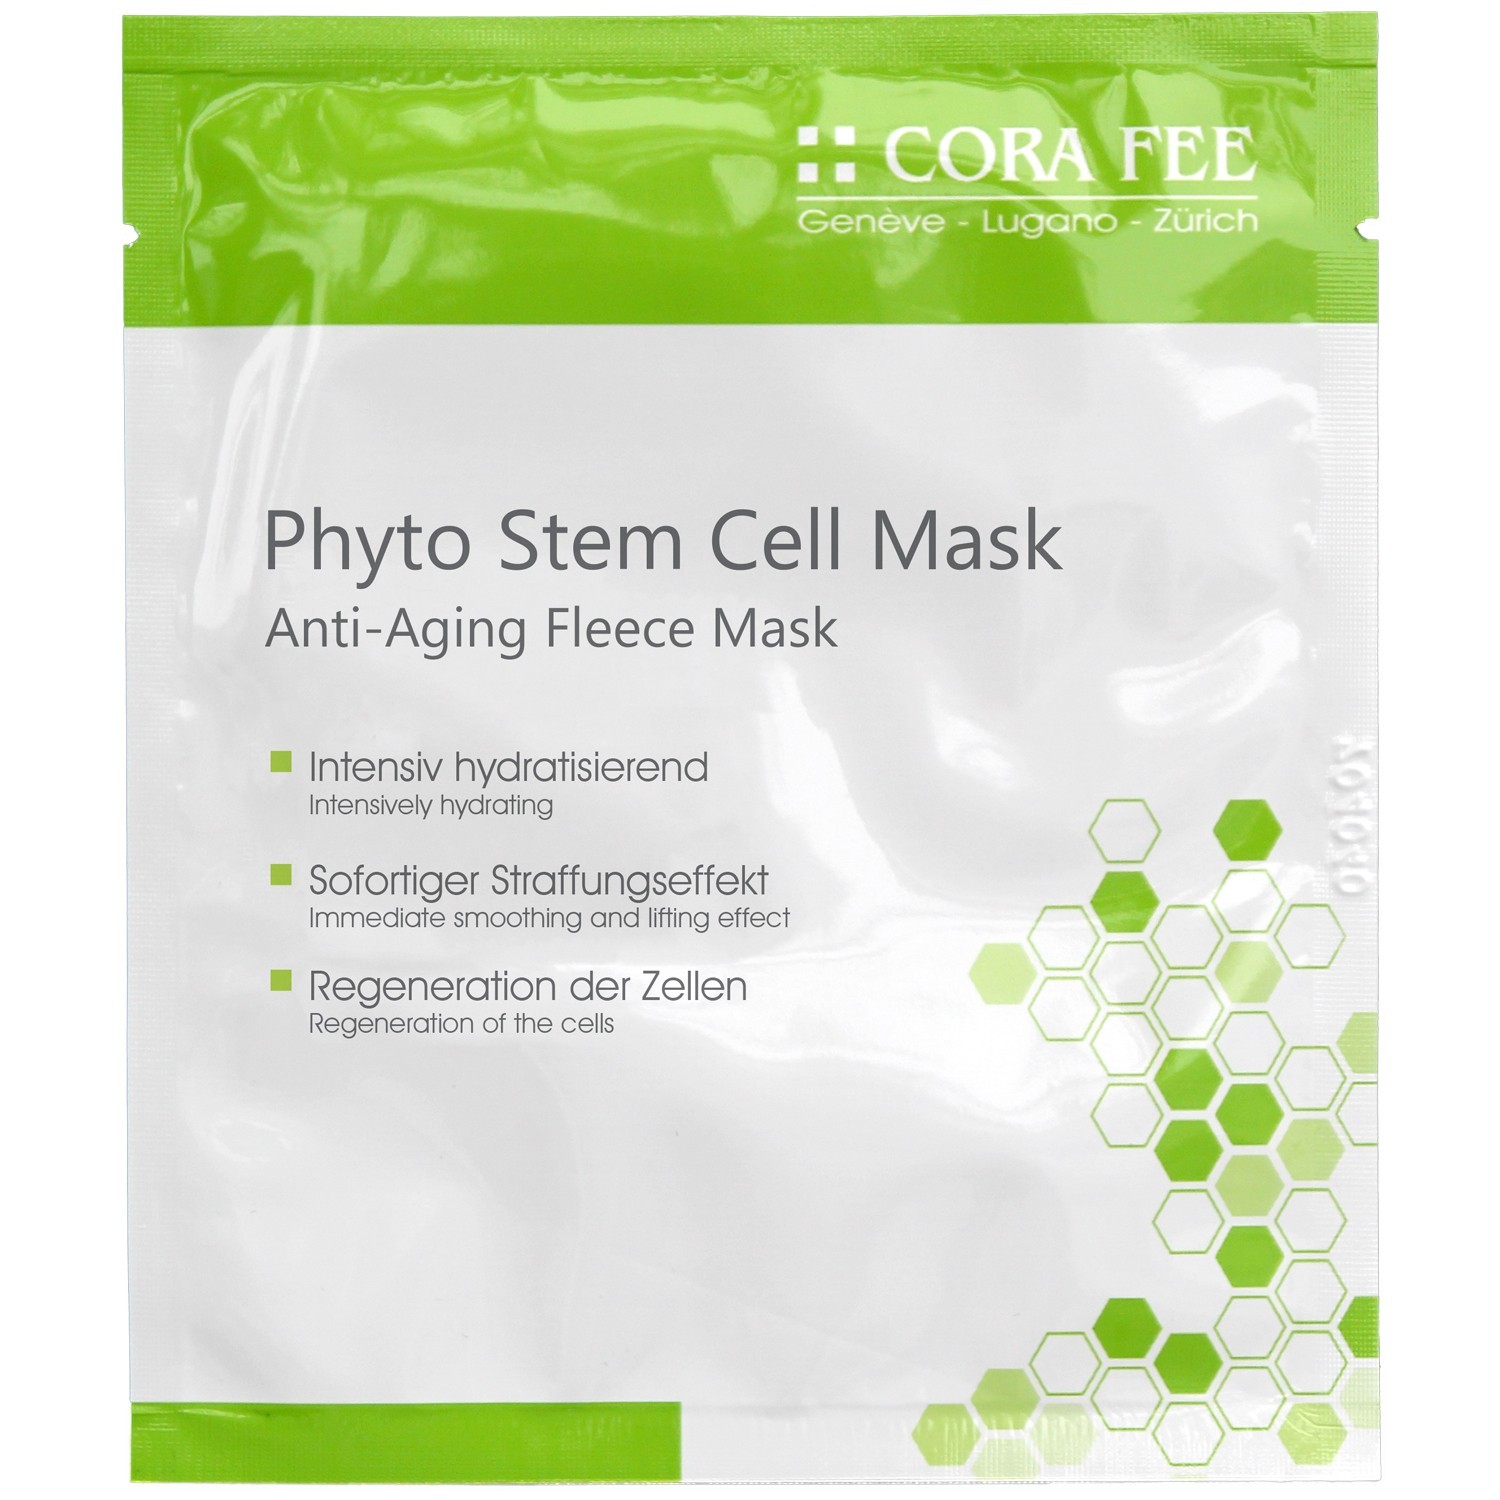 cora-fee-phyto-stem-cell-mask